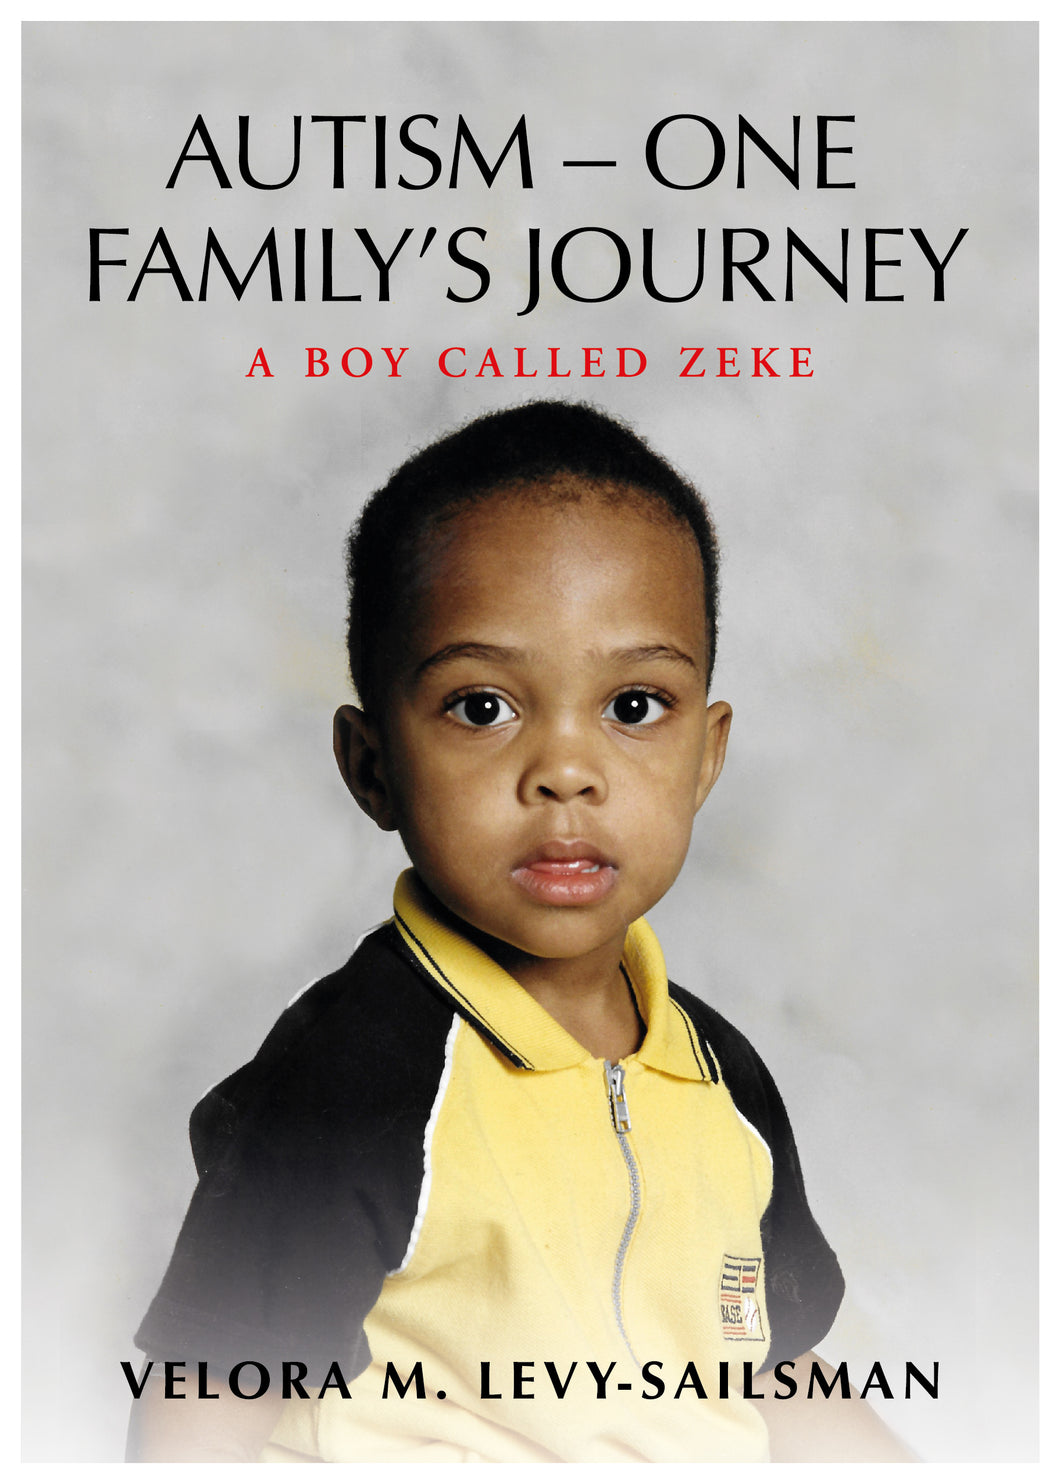 Autism - One Family's Journey, A Boy called Zeke - Velora M. Levy- Sailsman